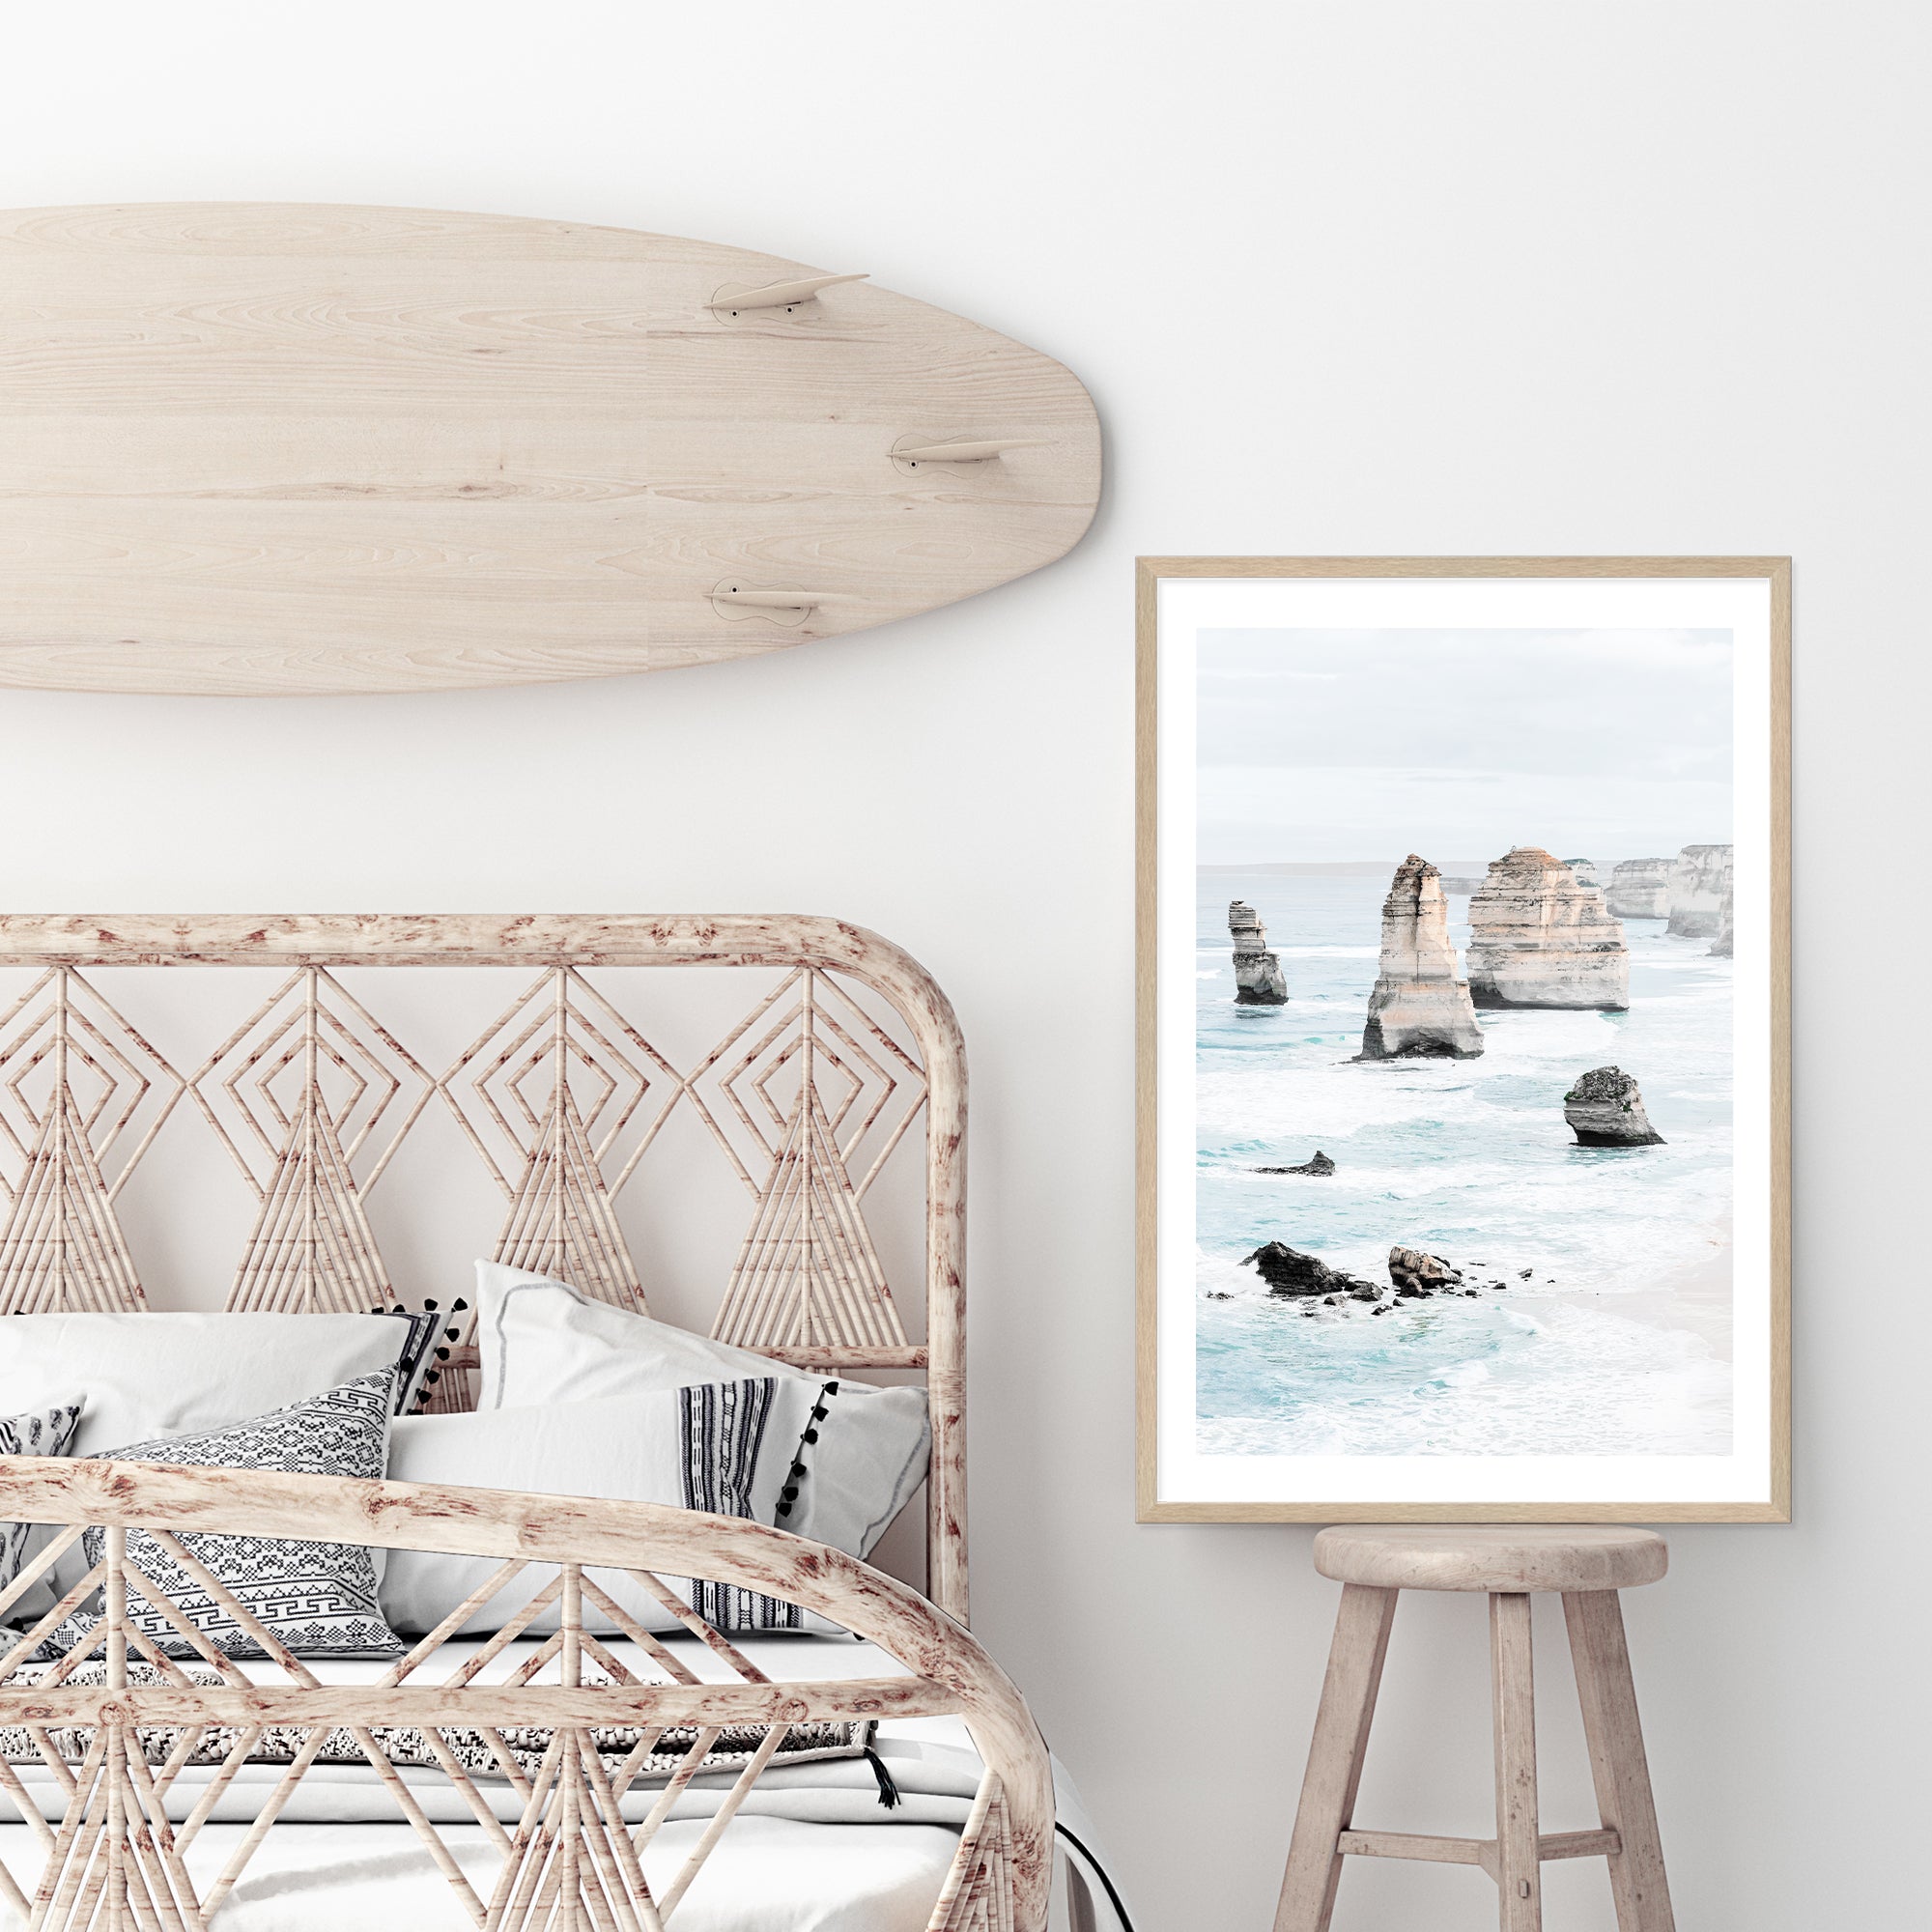 A stunning artwork of the Australian Coast line from the Great Ocean Road, this art print features the Twelve Apostles B. 